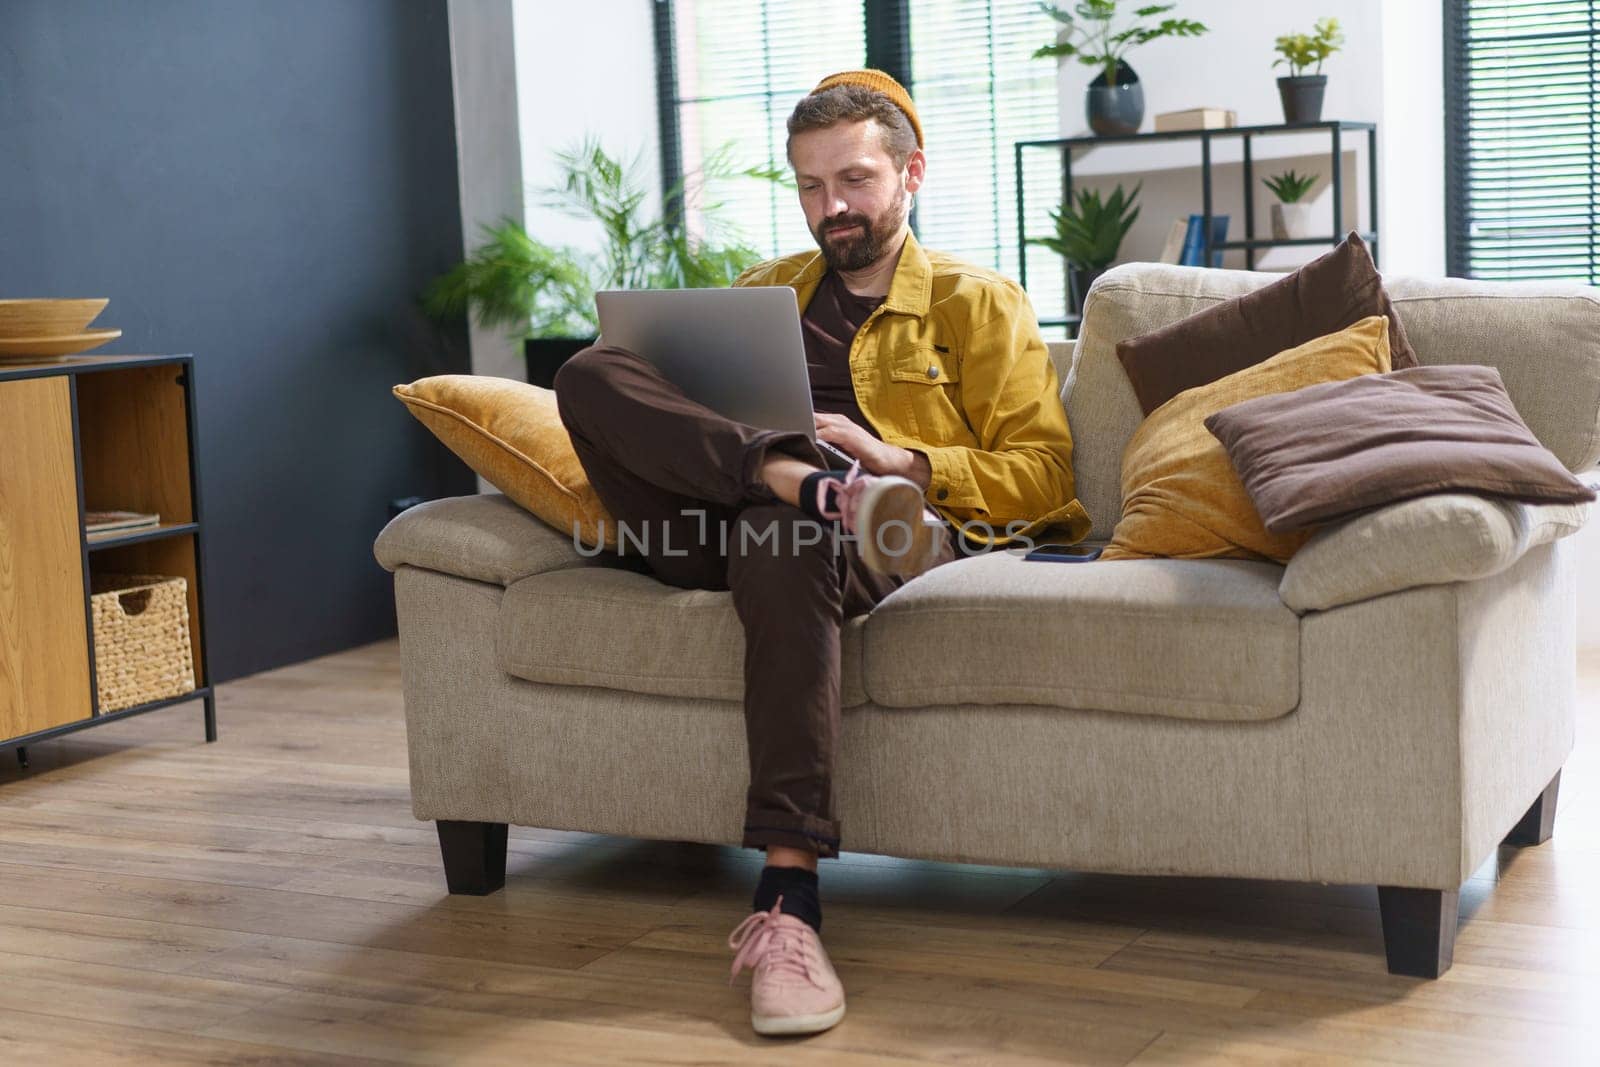 Man sitting at home, engrossed in laptop, types comments in social networks on internet. Man with a unique and eccentric demeanor, giving him appearance of weirdo or crank. . High quality photo